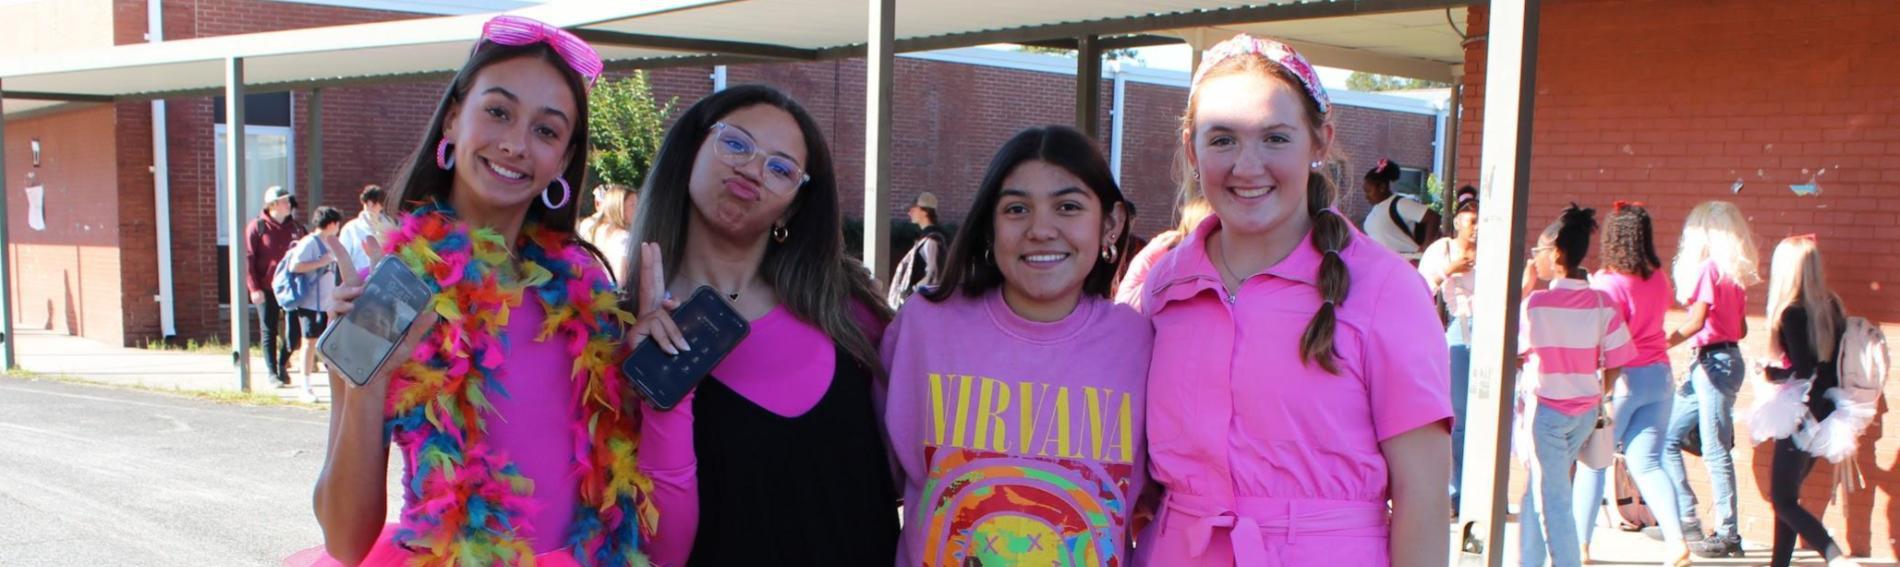 Four girls smile at the camera while wearing pink clothing to celebrate Pink Out Day